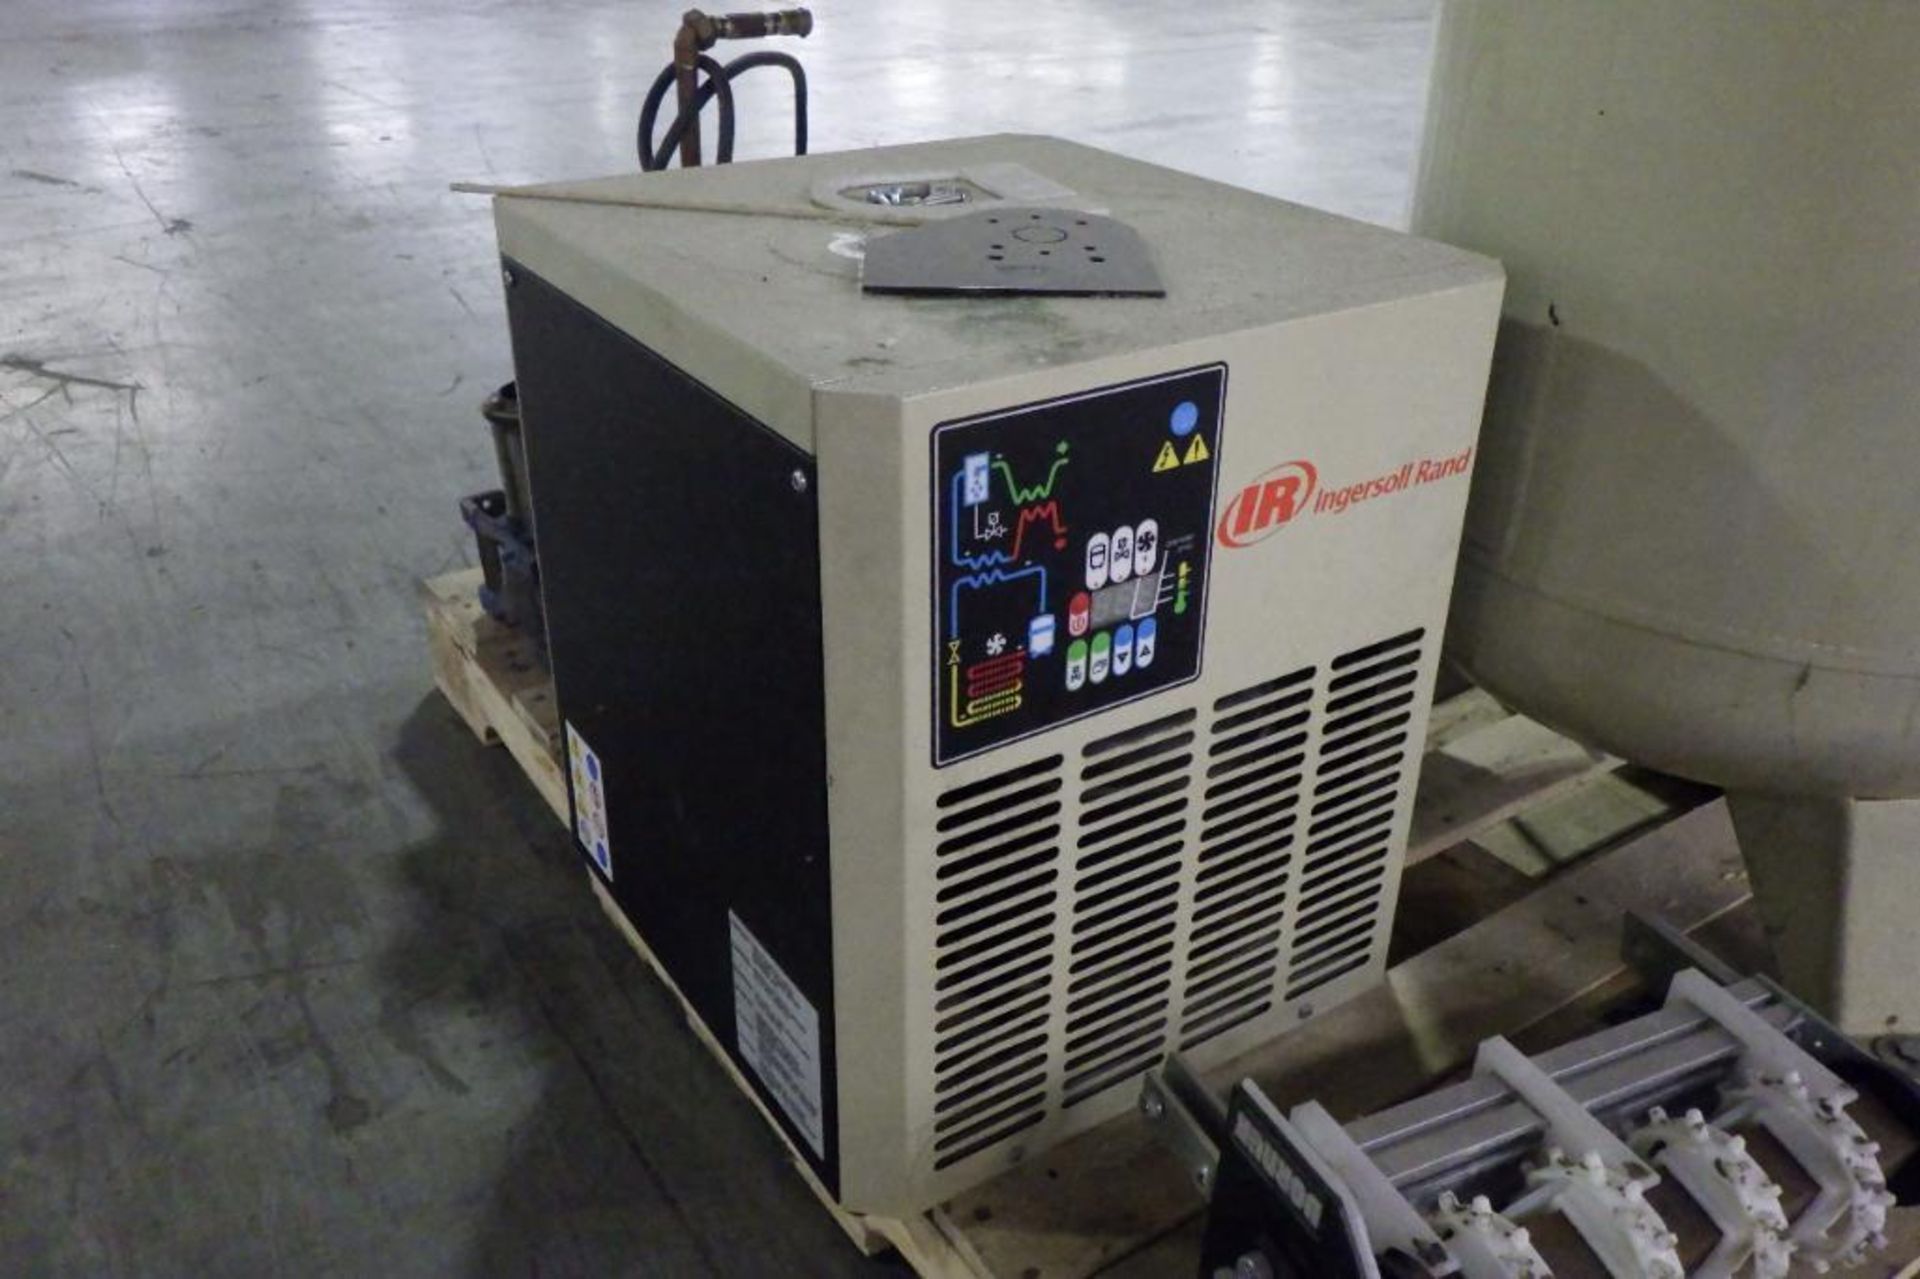 Ingersoll rand air compressor with dryer - Image 10 of 12